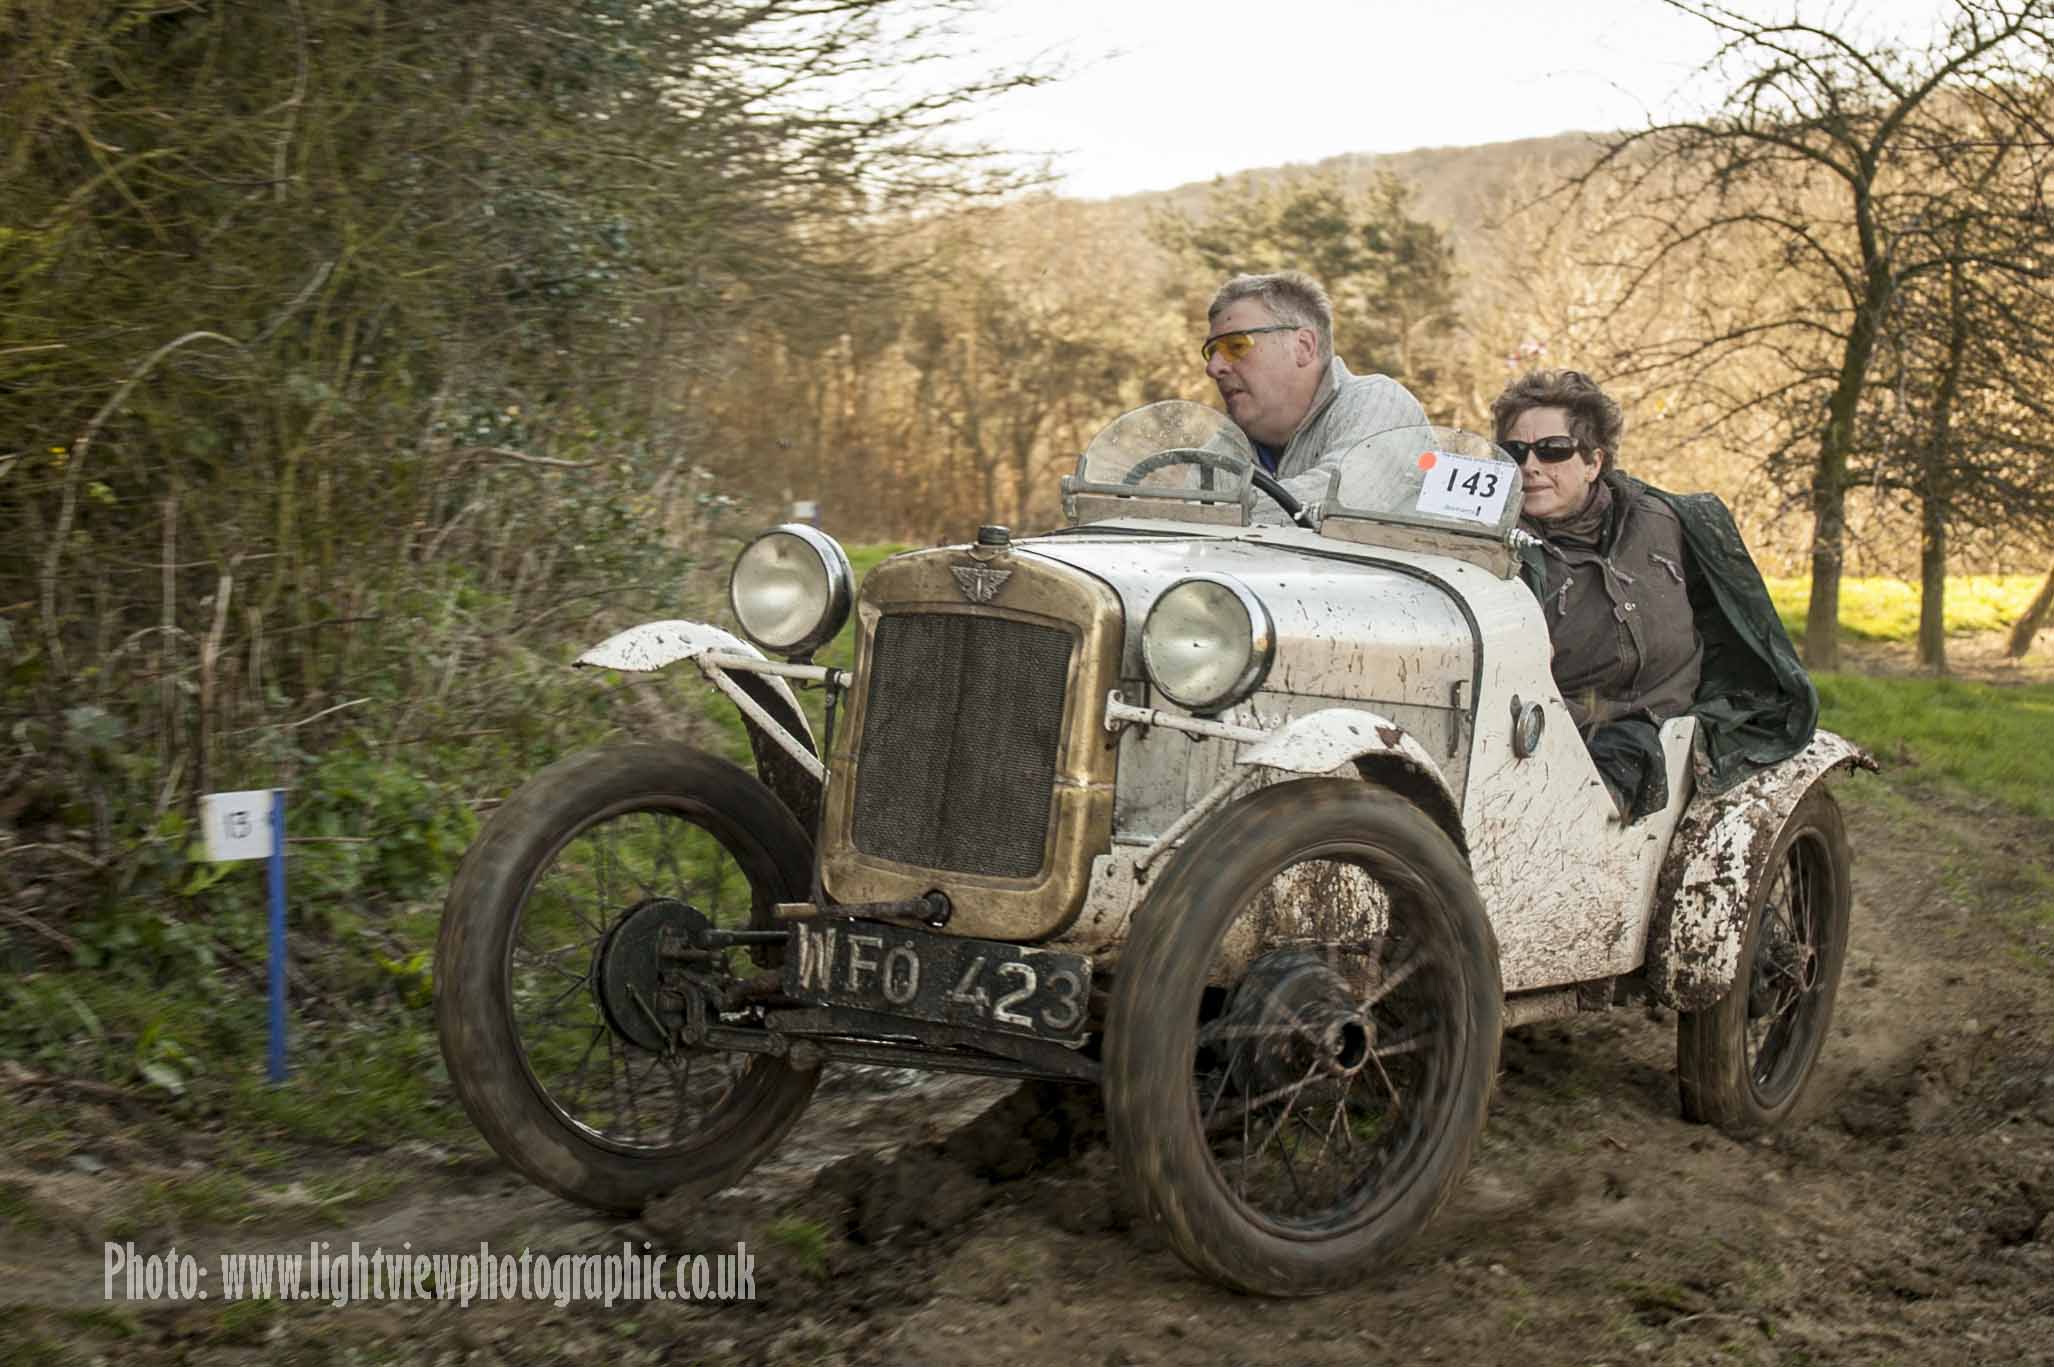 VSCC Triallists take to the hills once more this weekend in Herefordshire! cover